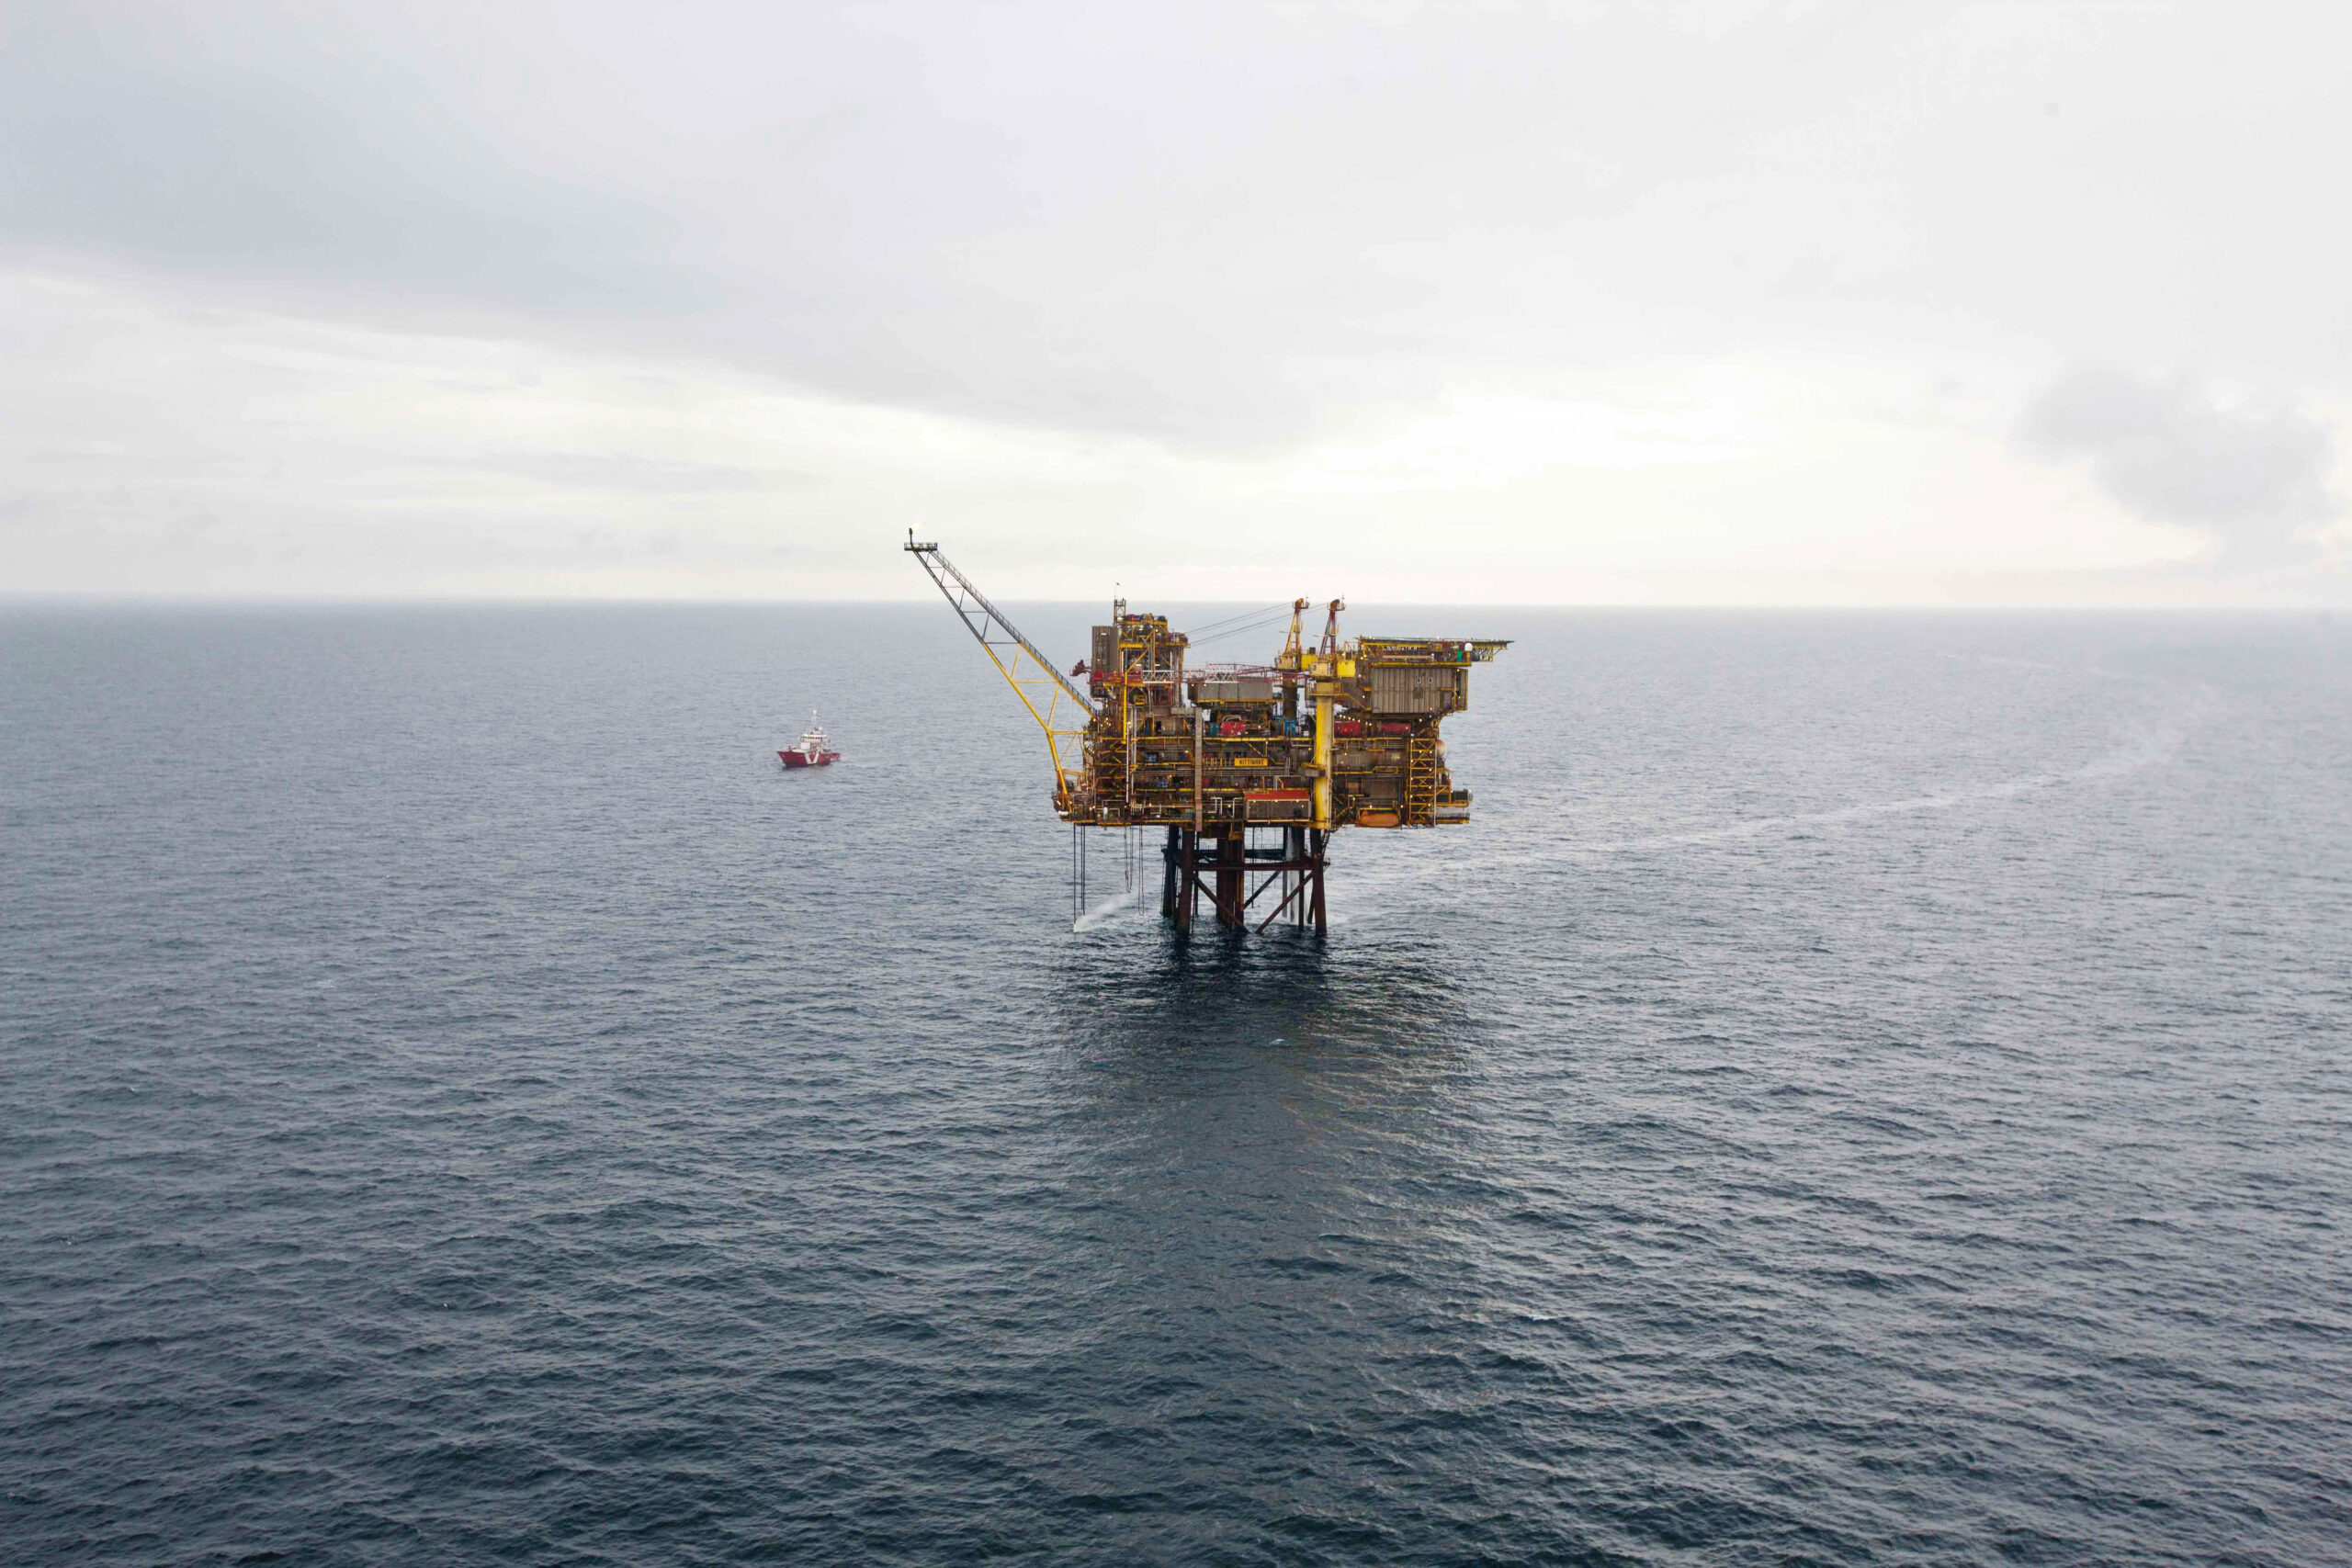 MEMBER NEWS: Petrofac awarded North Sea contract extension by Enquest